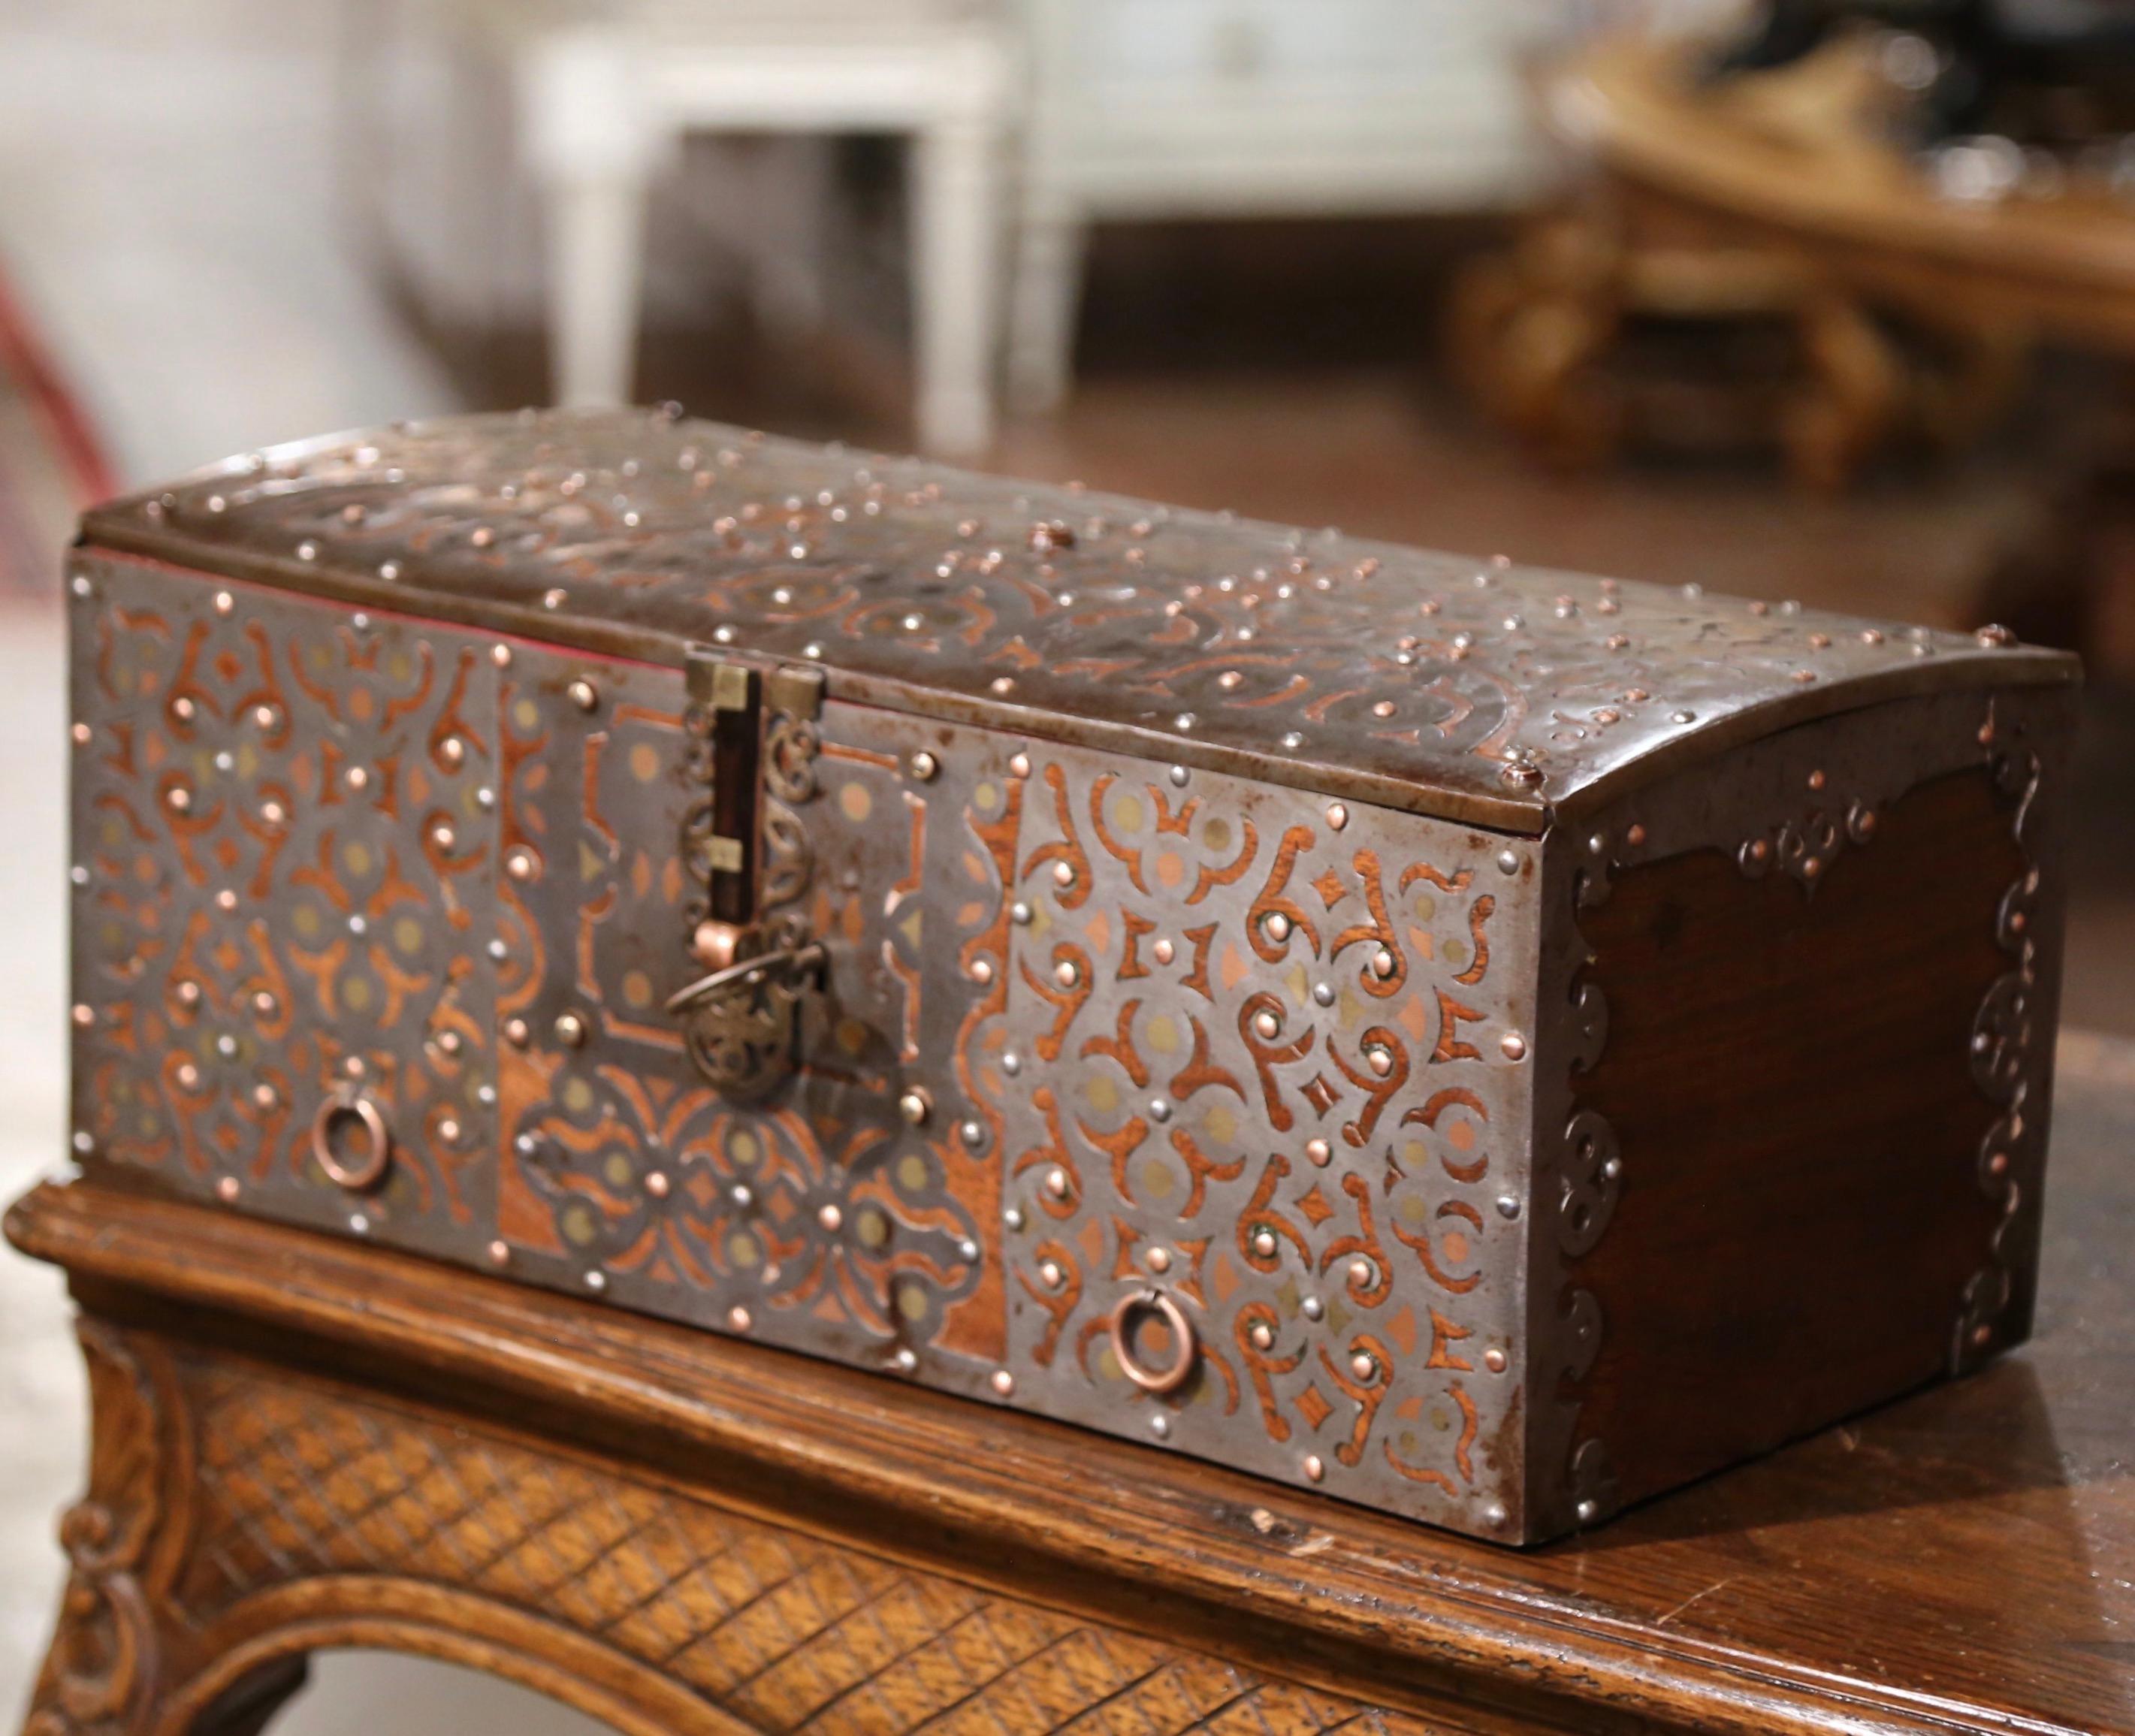 Forged 19th Century Spanish Polished Iron Box with Pierced Engraved Geometric Motifs For Sale